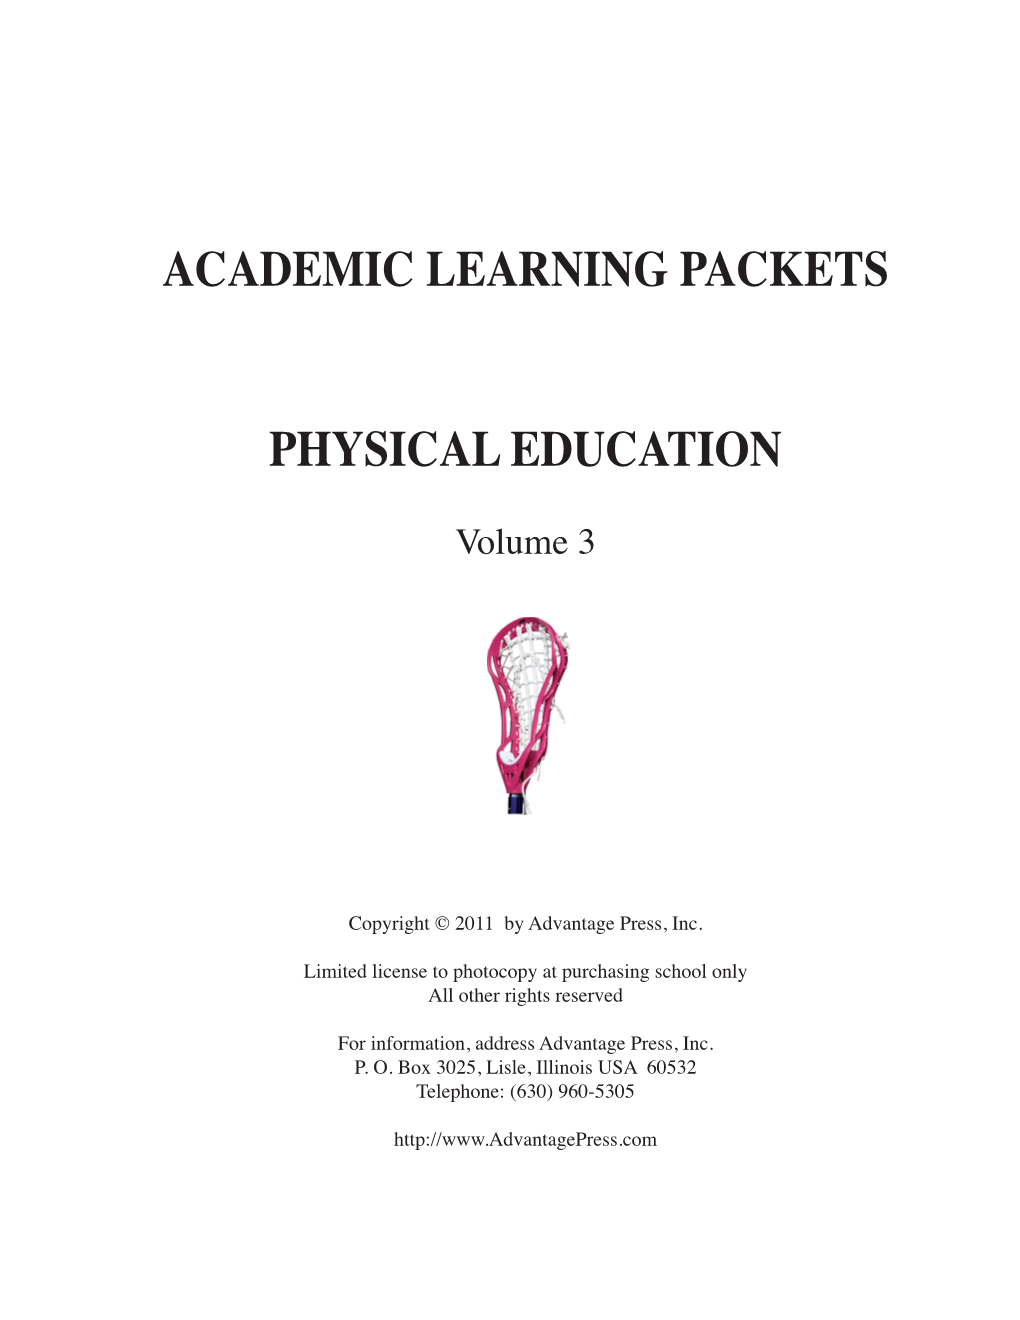 Academic Learning Packets Physical Education